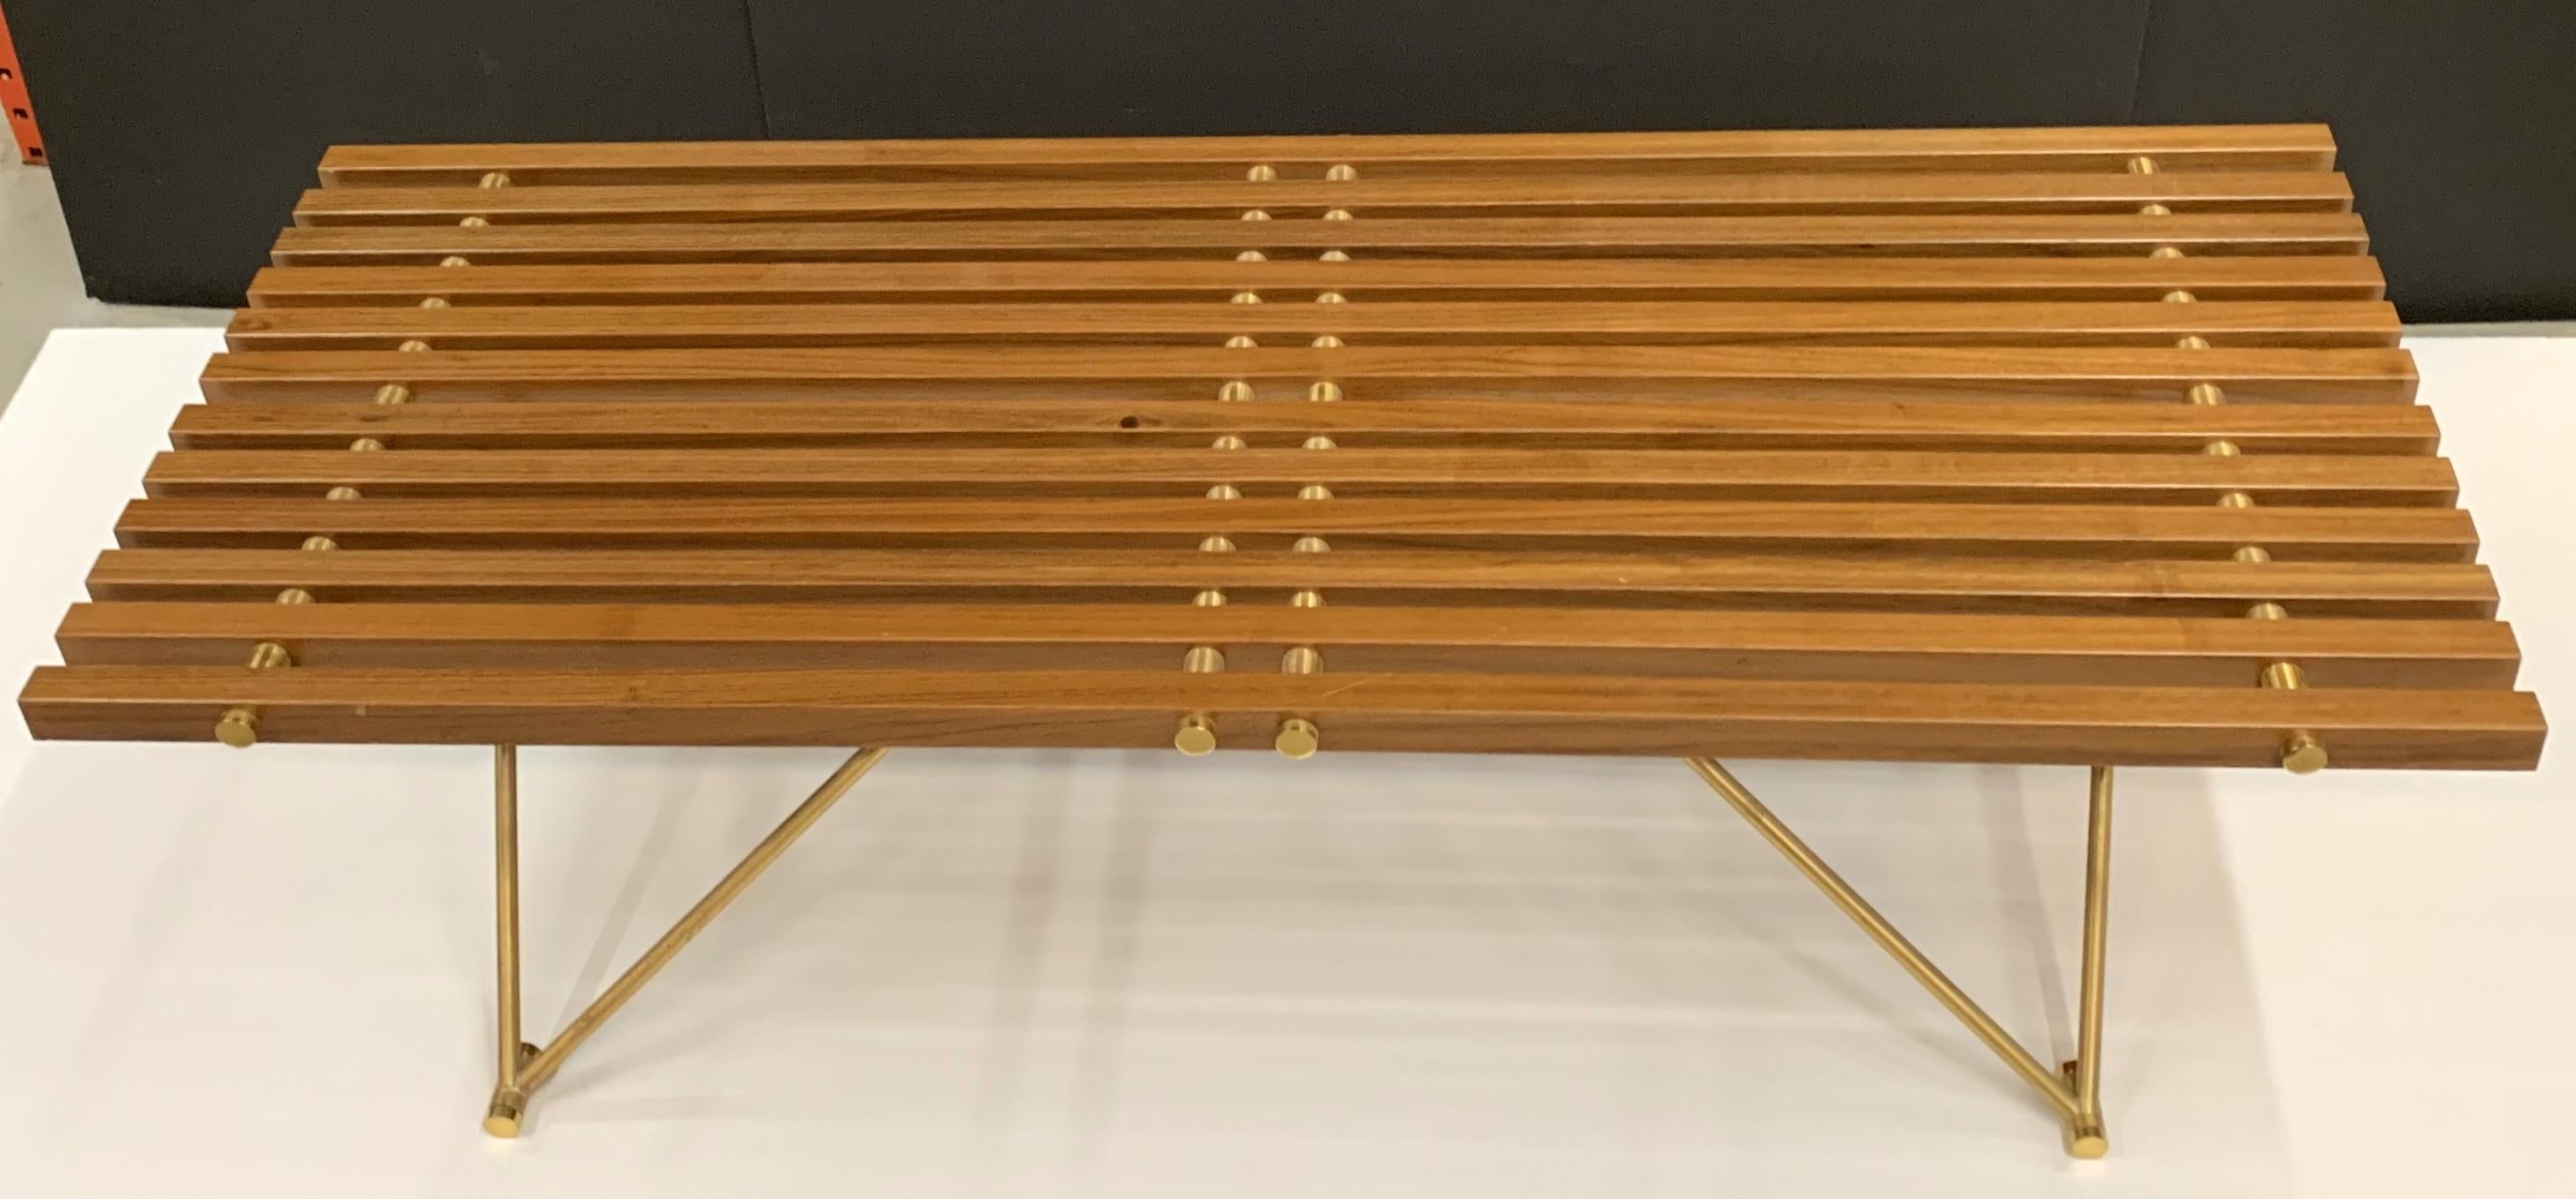 Wonderful Mid-Century Modern Wood Slat Polished Brass Coffee Cocktail Table In Good Condition For Sale In Roslyn, NY